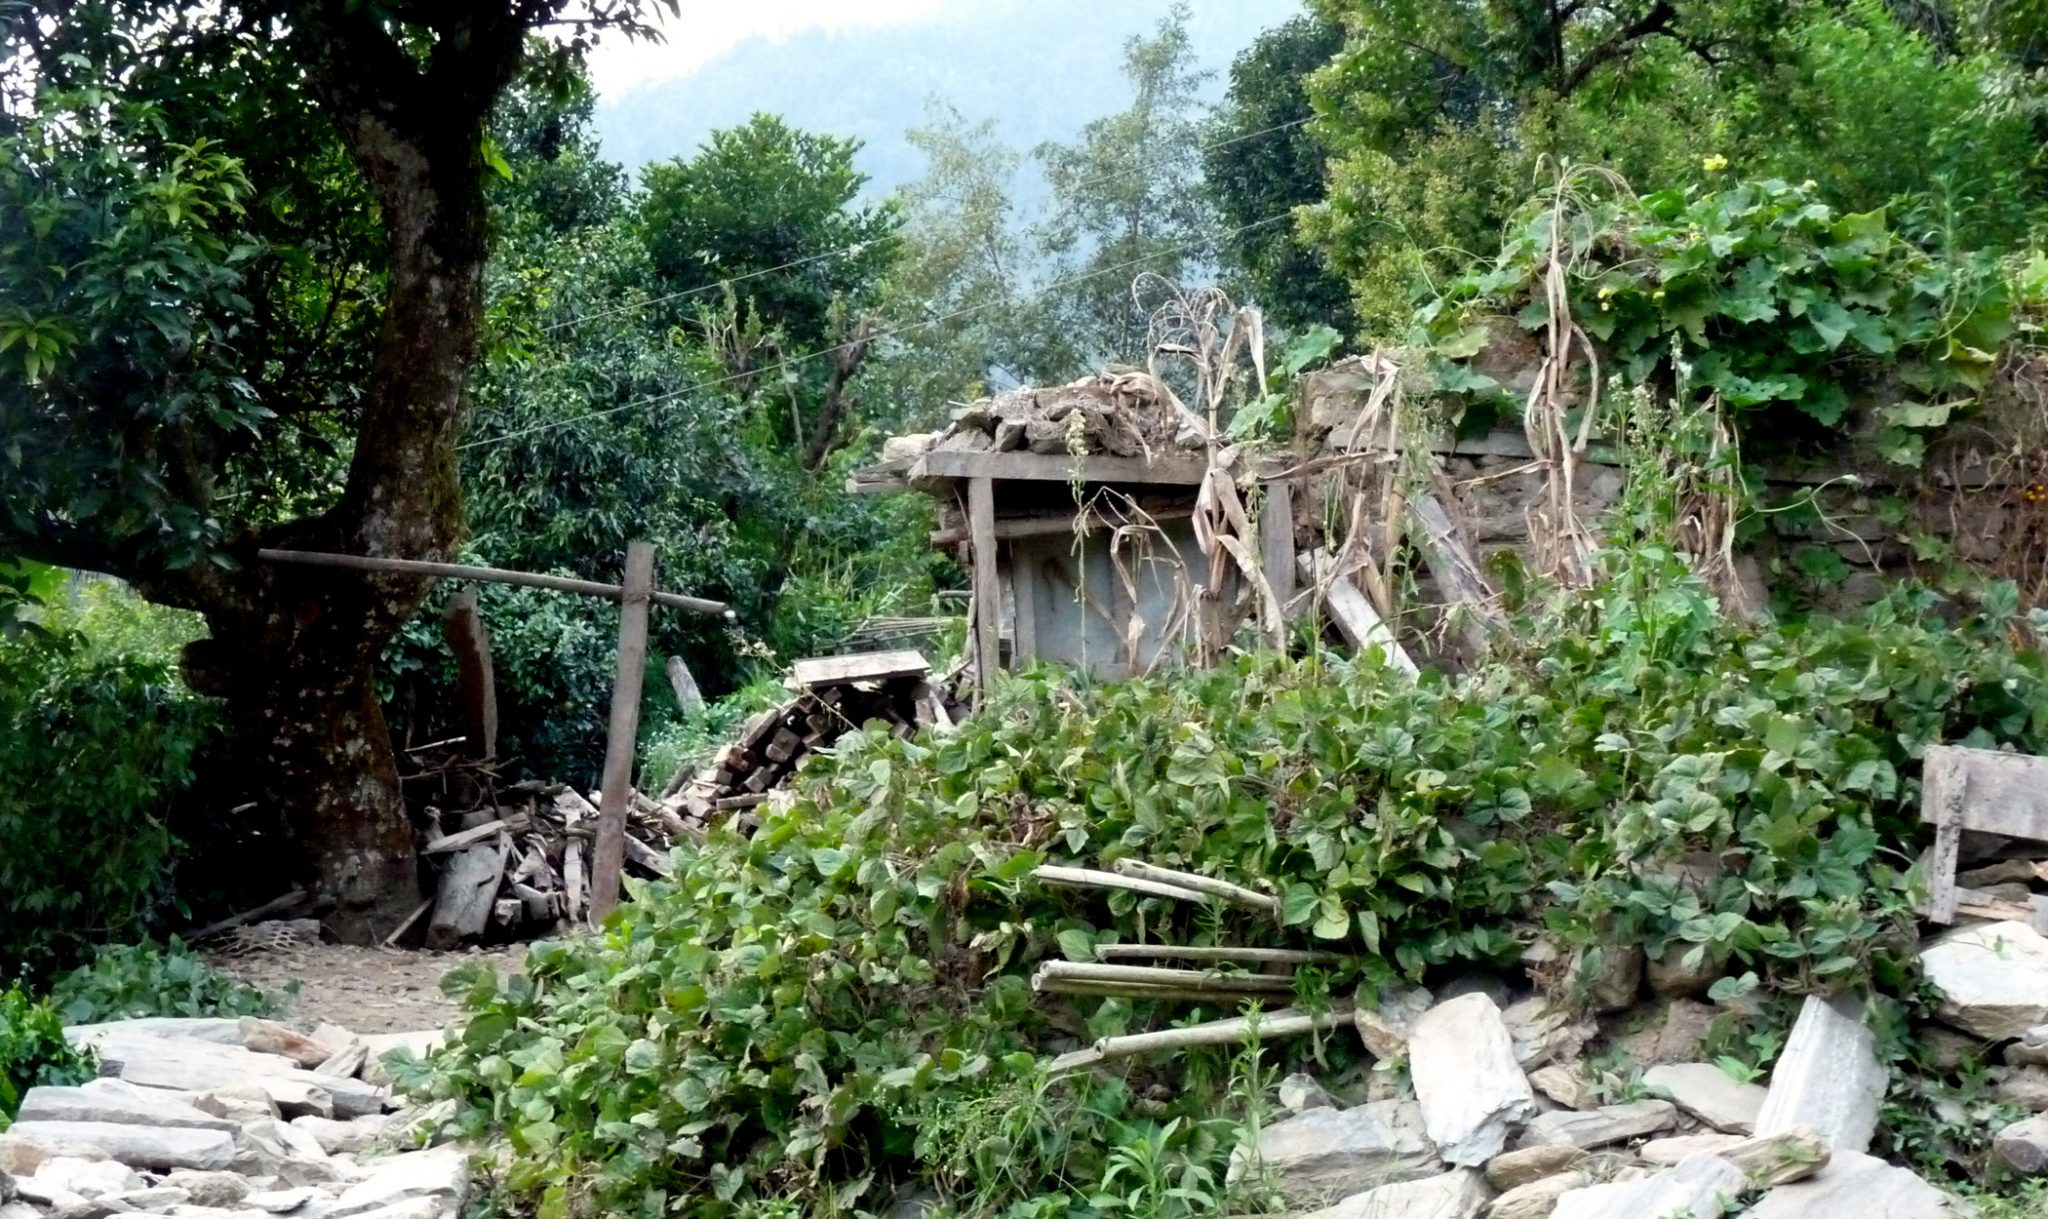 Foliage grows out of the remains of a house.